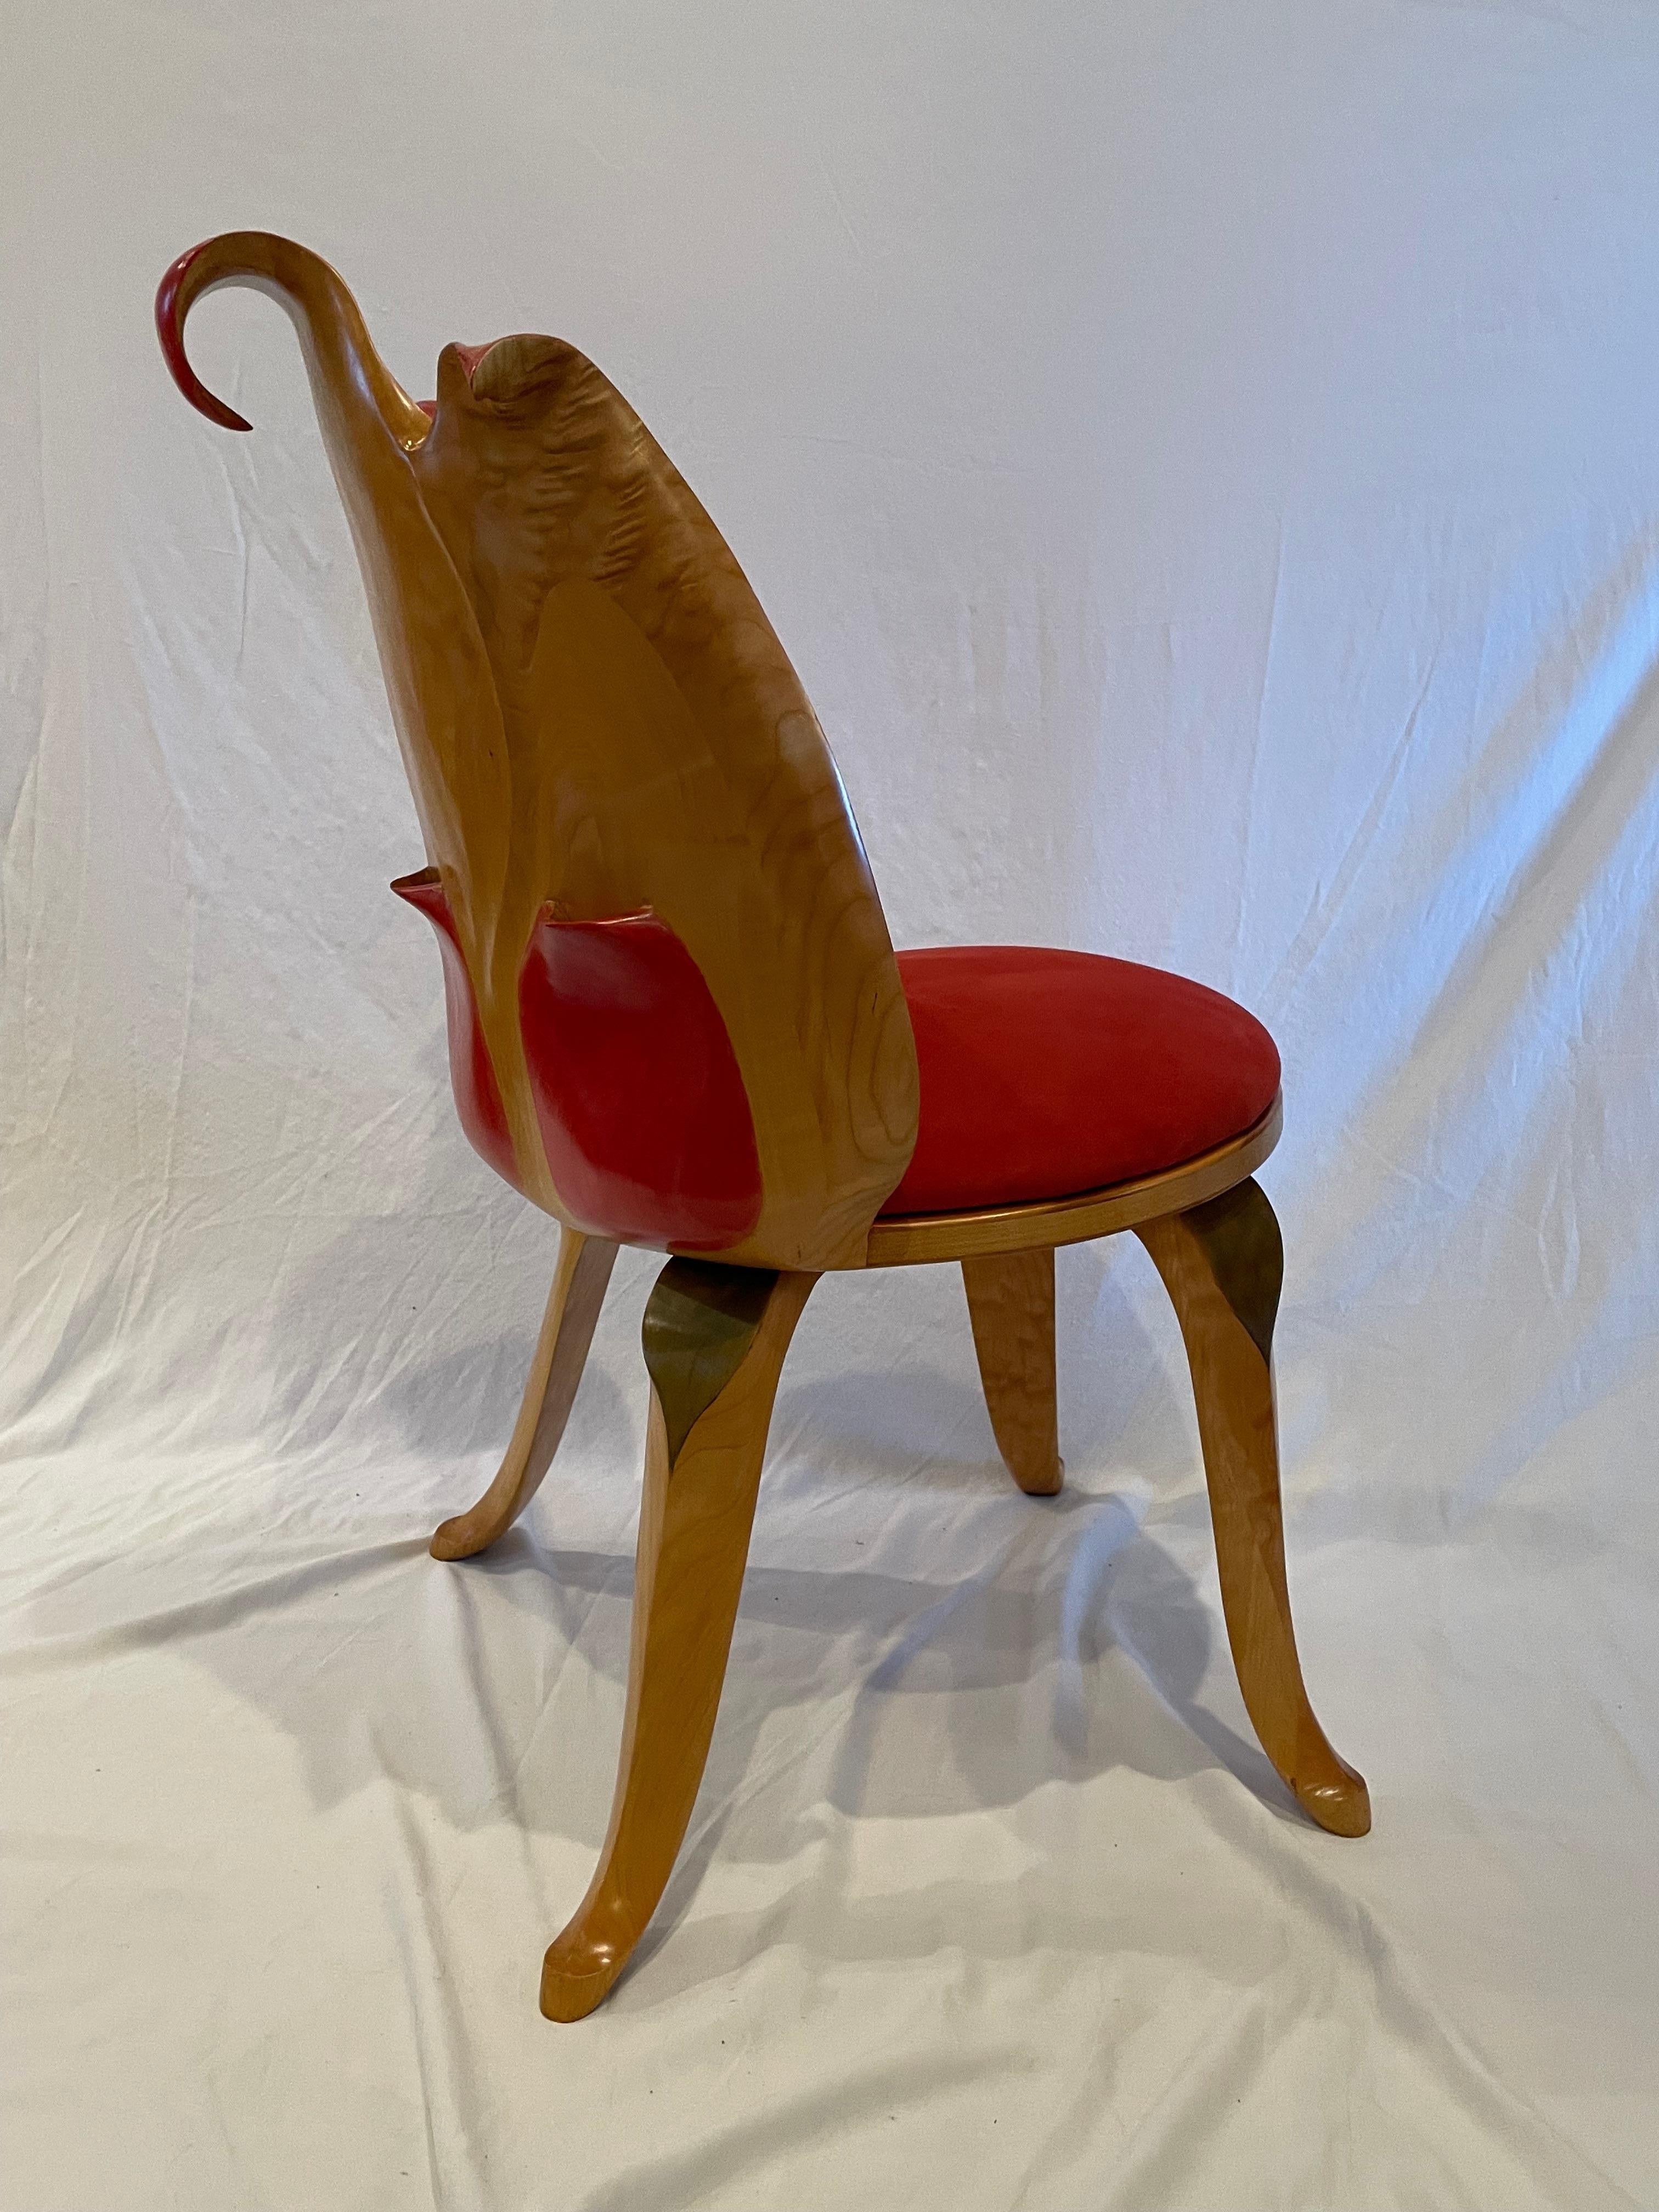 The delicate tulip shaped chair has a back that forms the inside of a tulip.
The legs are formed in leaf shapes, and the seat is finished in a luxe Ultra-suede. The back of the chair is in a natural finish allowing the beauty of the wood grain to